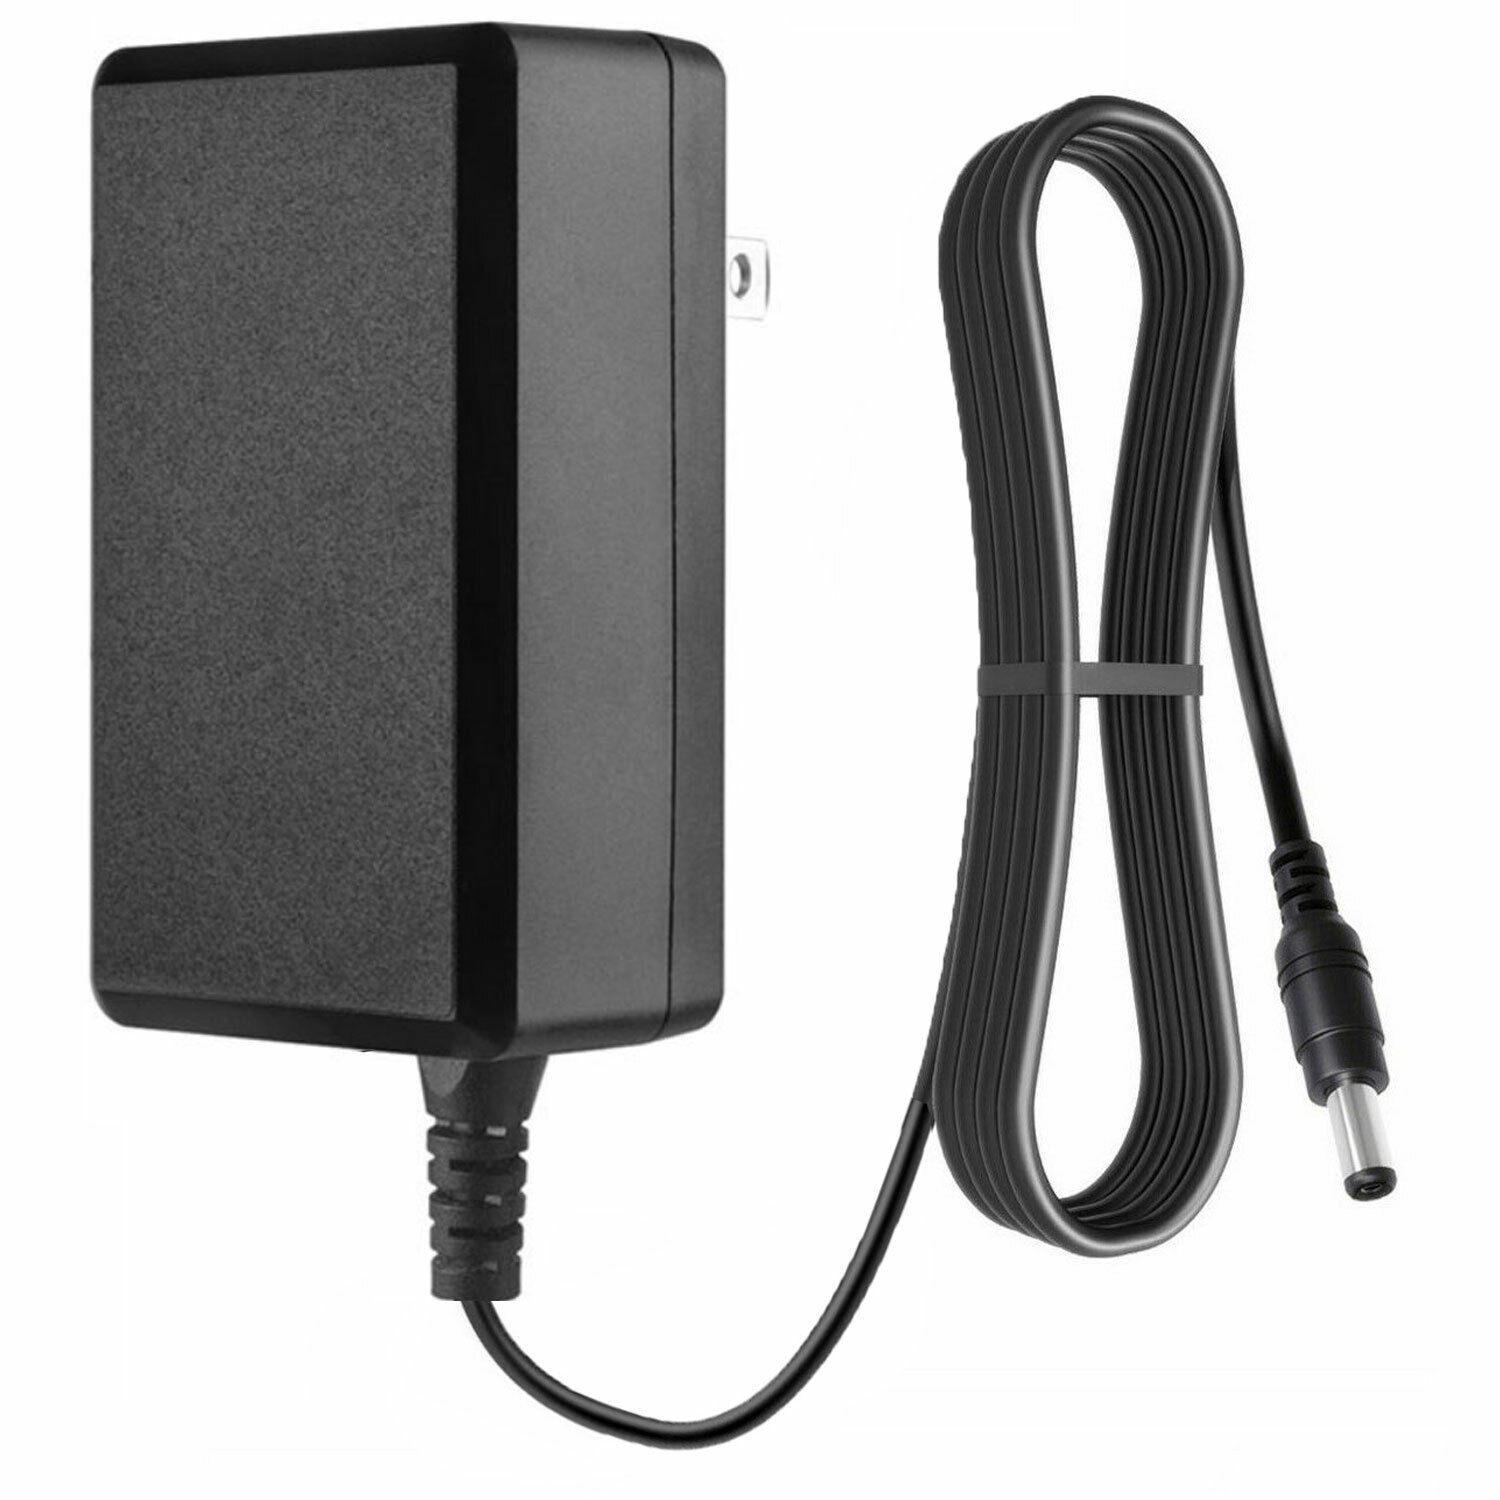 16.5V 2A AC Adapter for Google Home Speaker Charger Power Supply Cord Technical Specifications: Construction: 100% Br